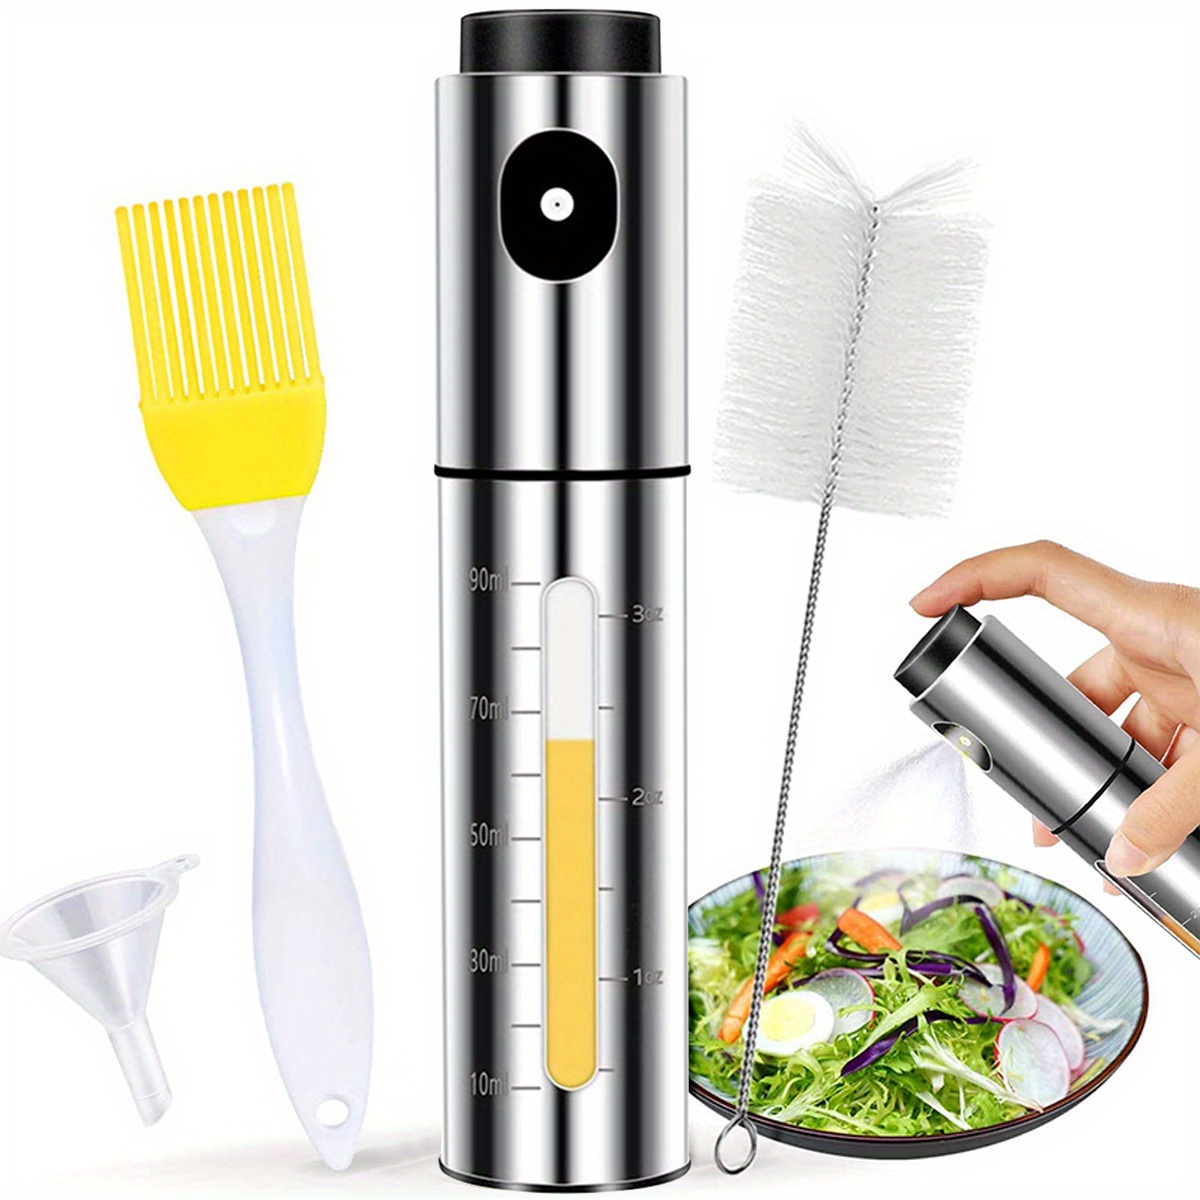 Portable Oil Spray Bottle with Brush Funnel for Cooking, 200ml